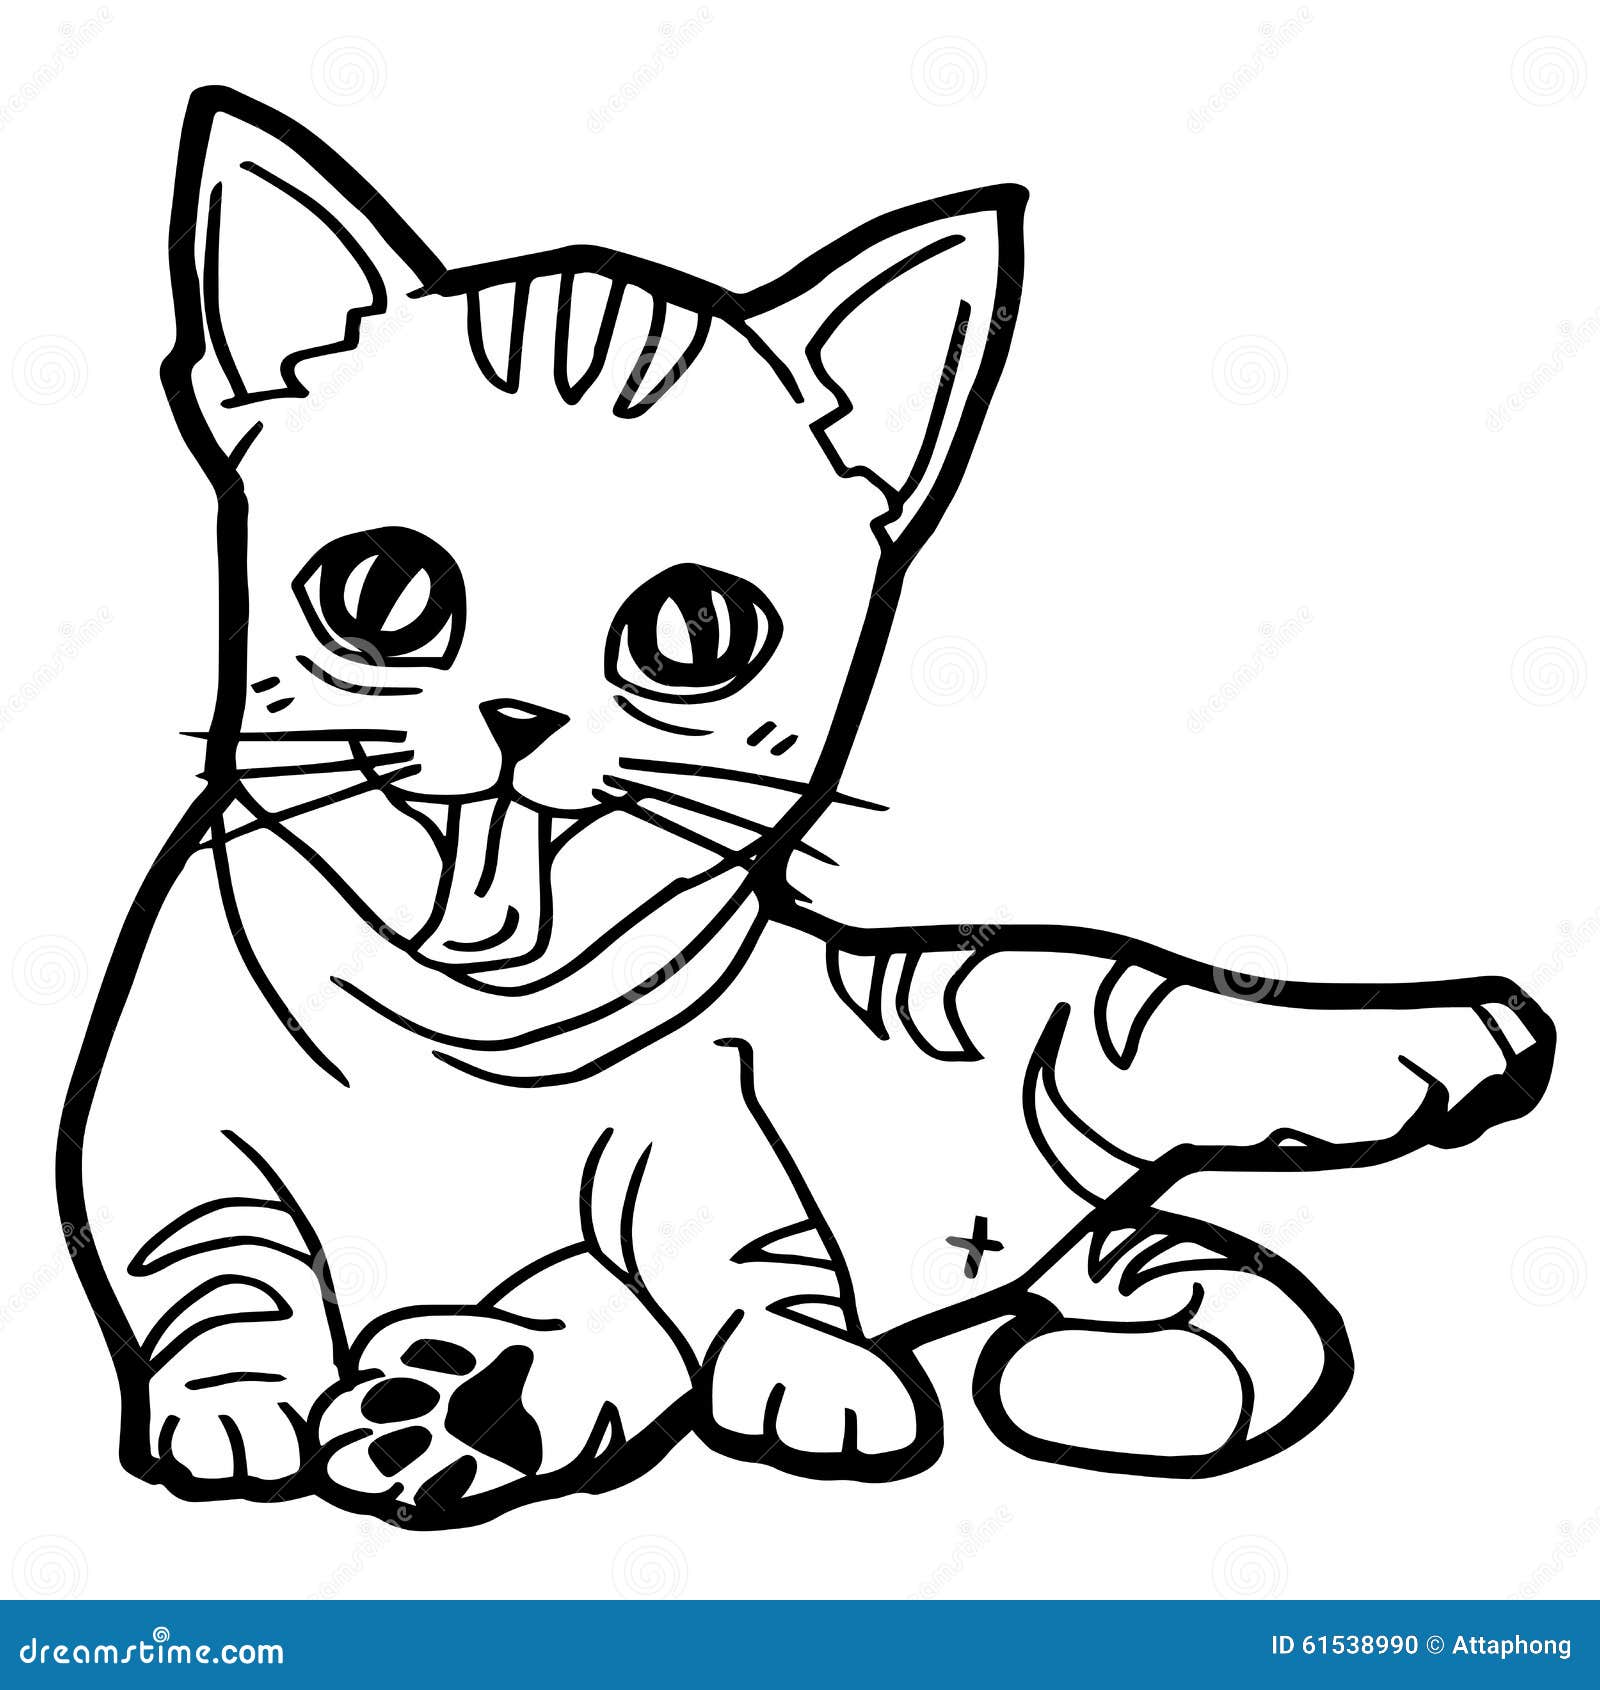 Download Cartoon Cat Coloring Page stock vector. Illustration of ...